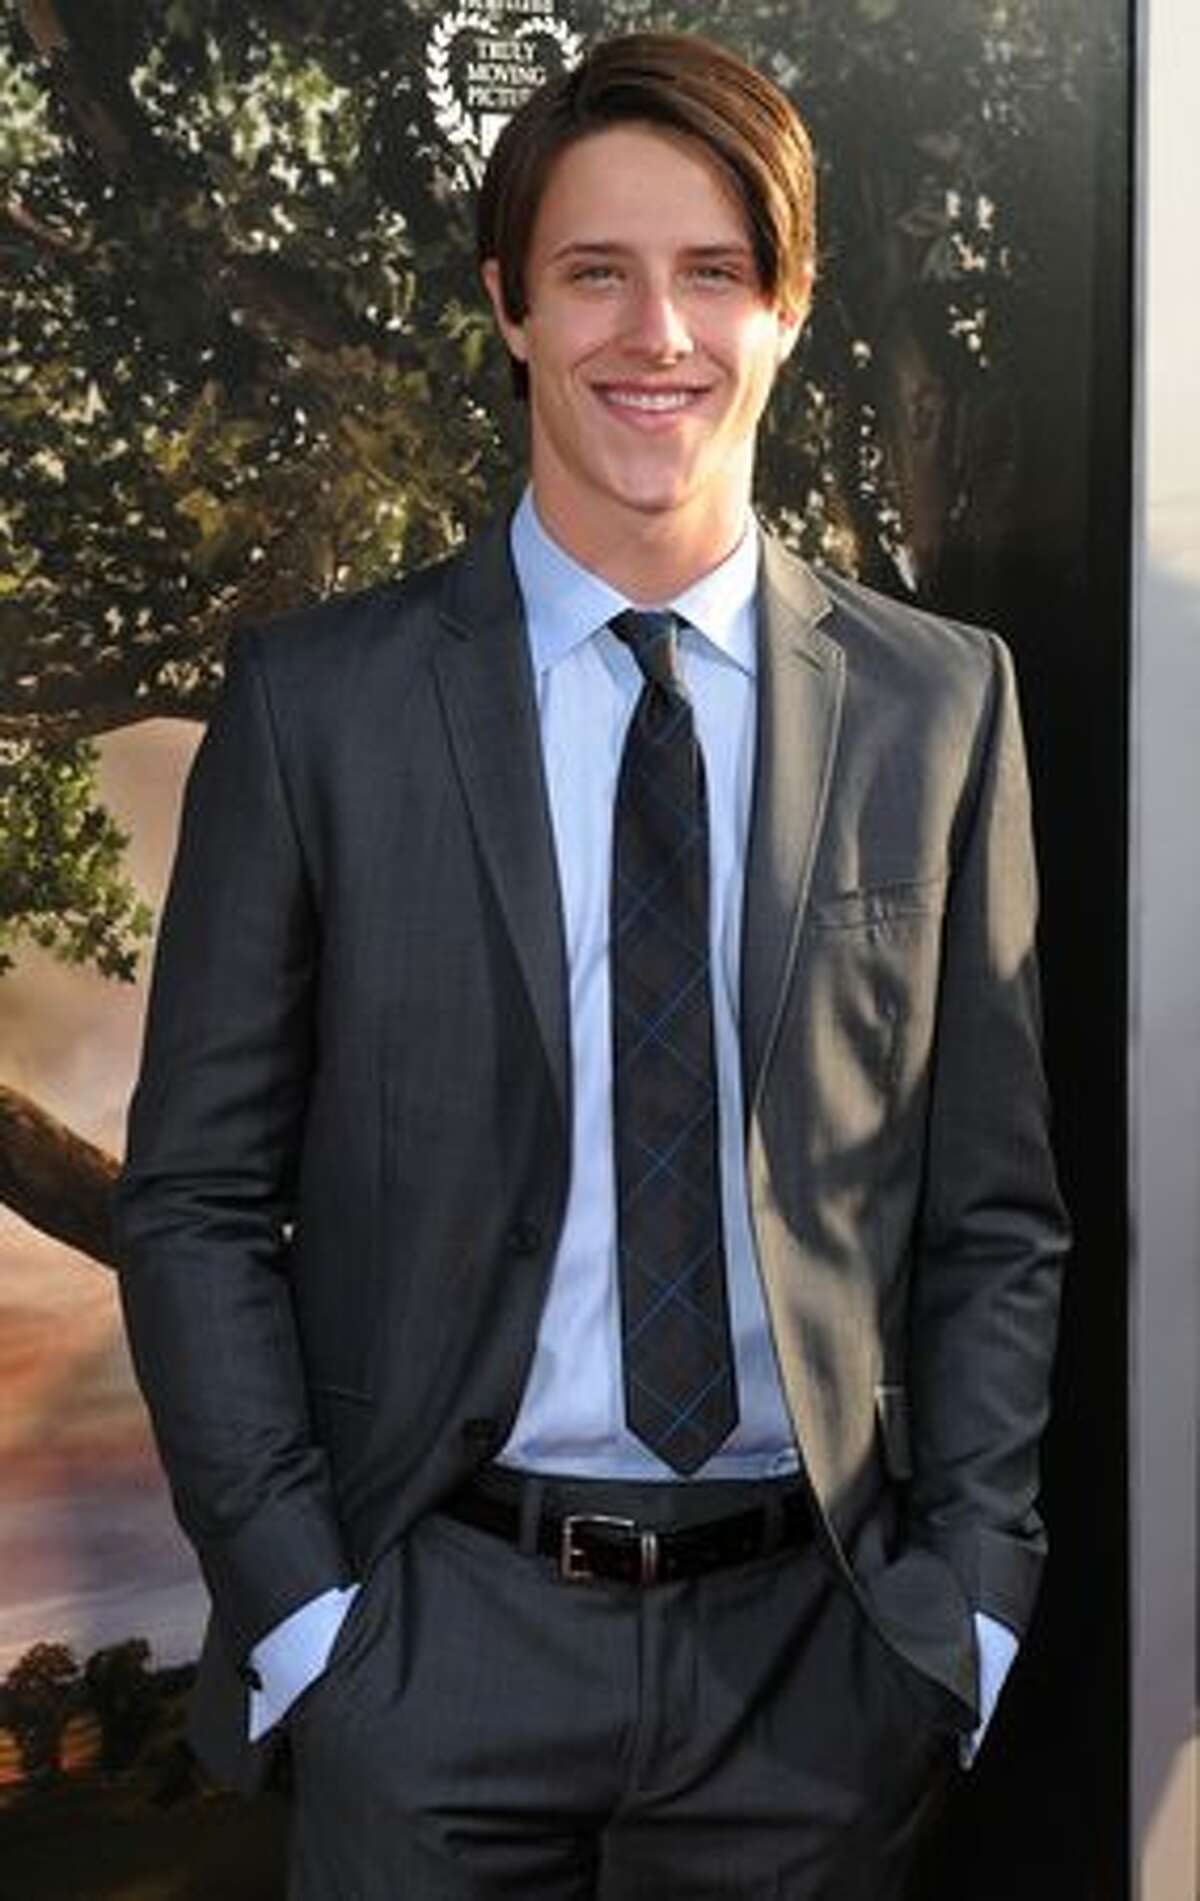 Actor Shane Harper poses on the red carpet as he arrives for the premiere of the movie "Flipped" at the Cinerama Dome Theater in Hollywood.